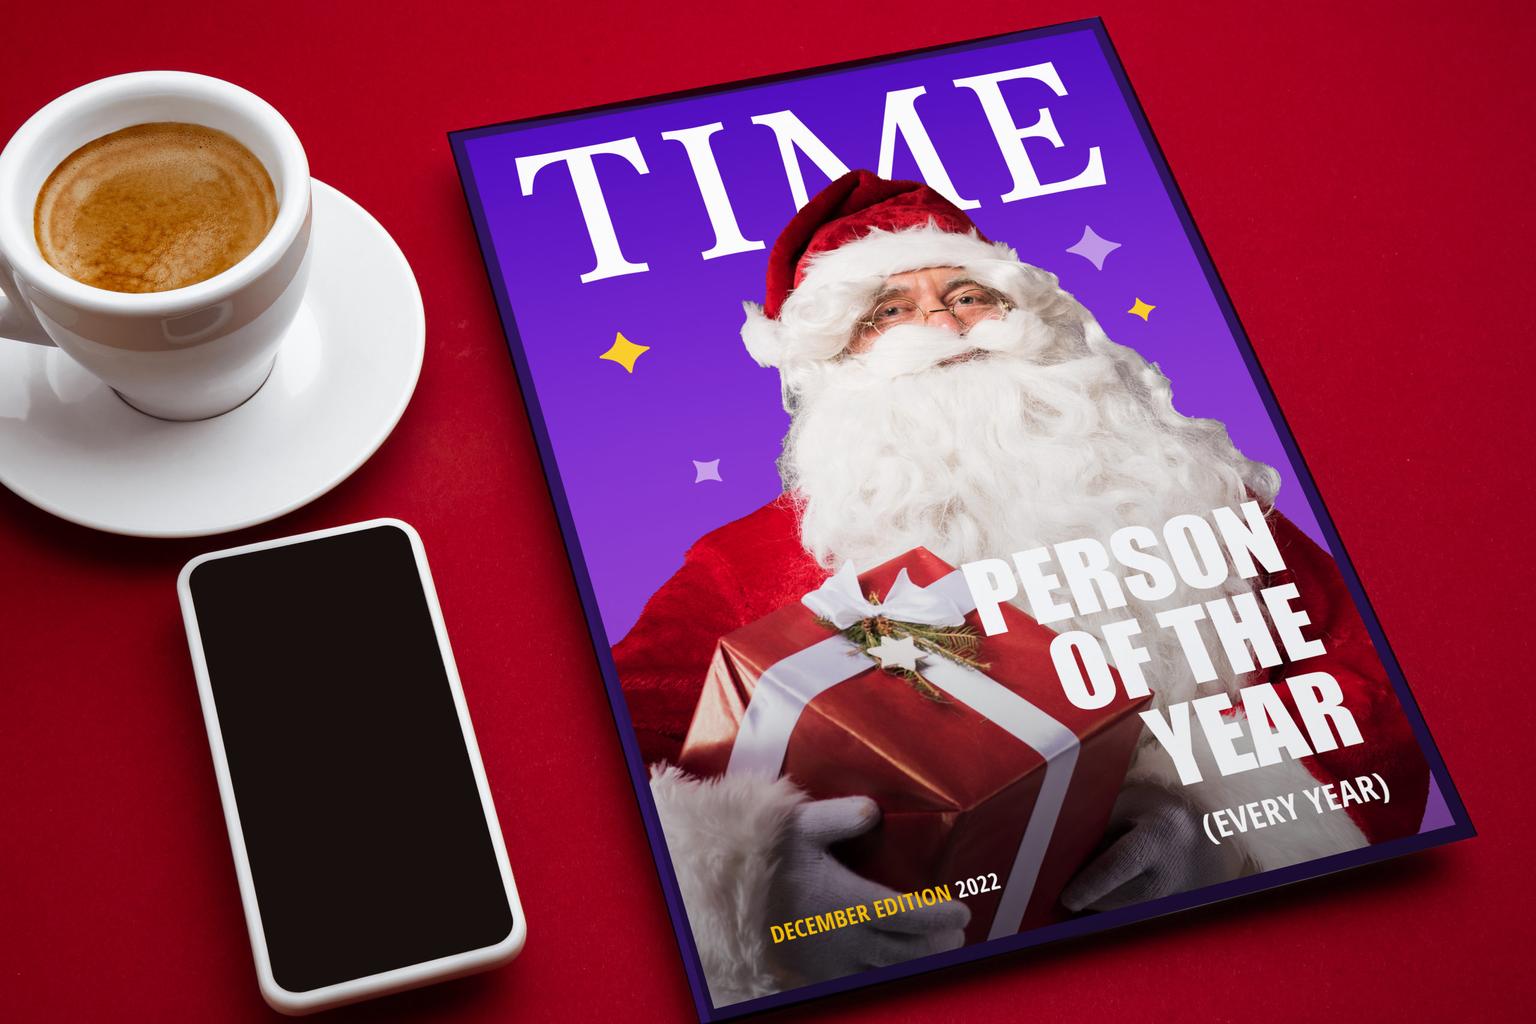 Simple All the Way: How Santa Uses Pepper to Reply to Billions of Letters